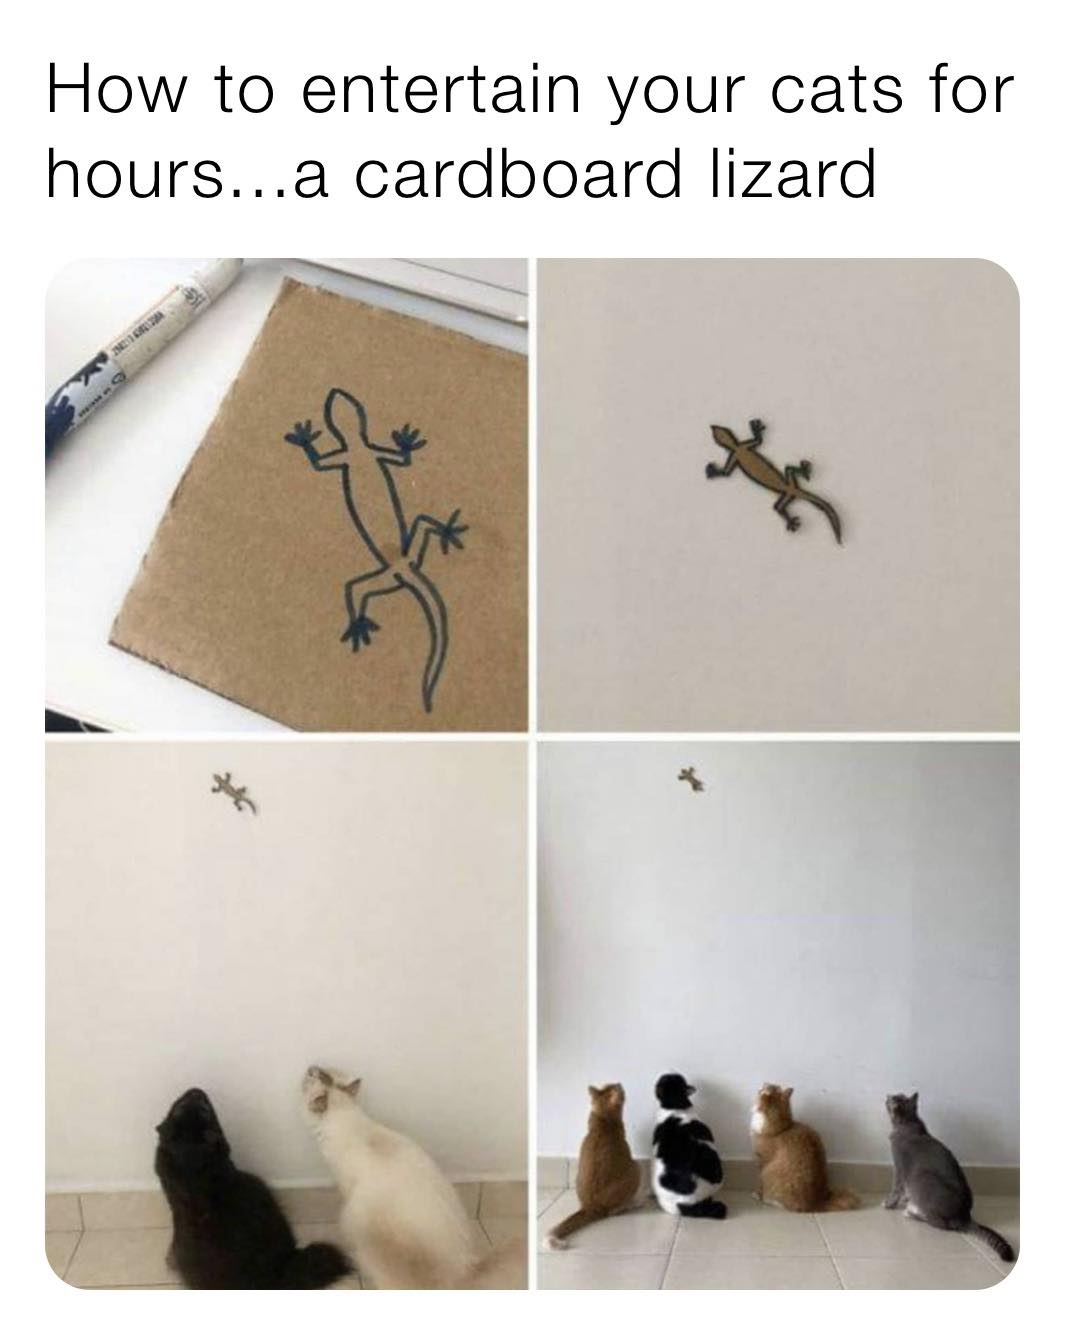 cardboard lizard for cats - How to entertain your cats for hours...a cardboard lizard 2